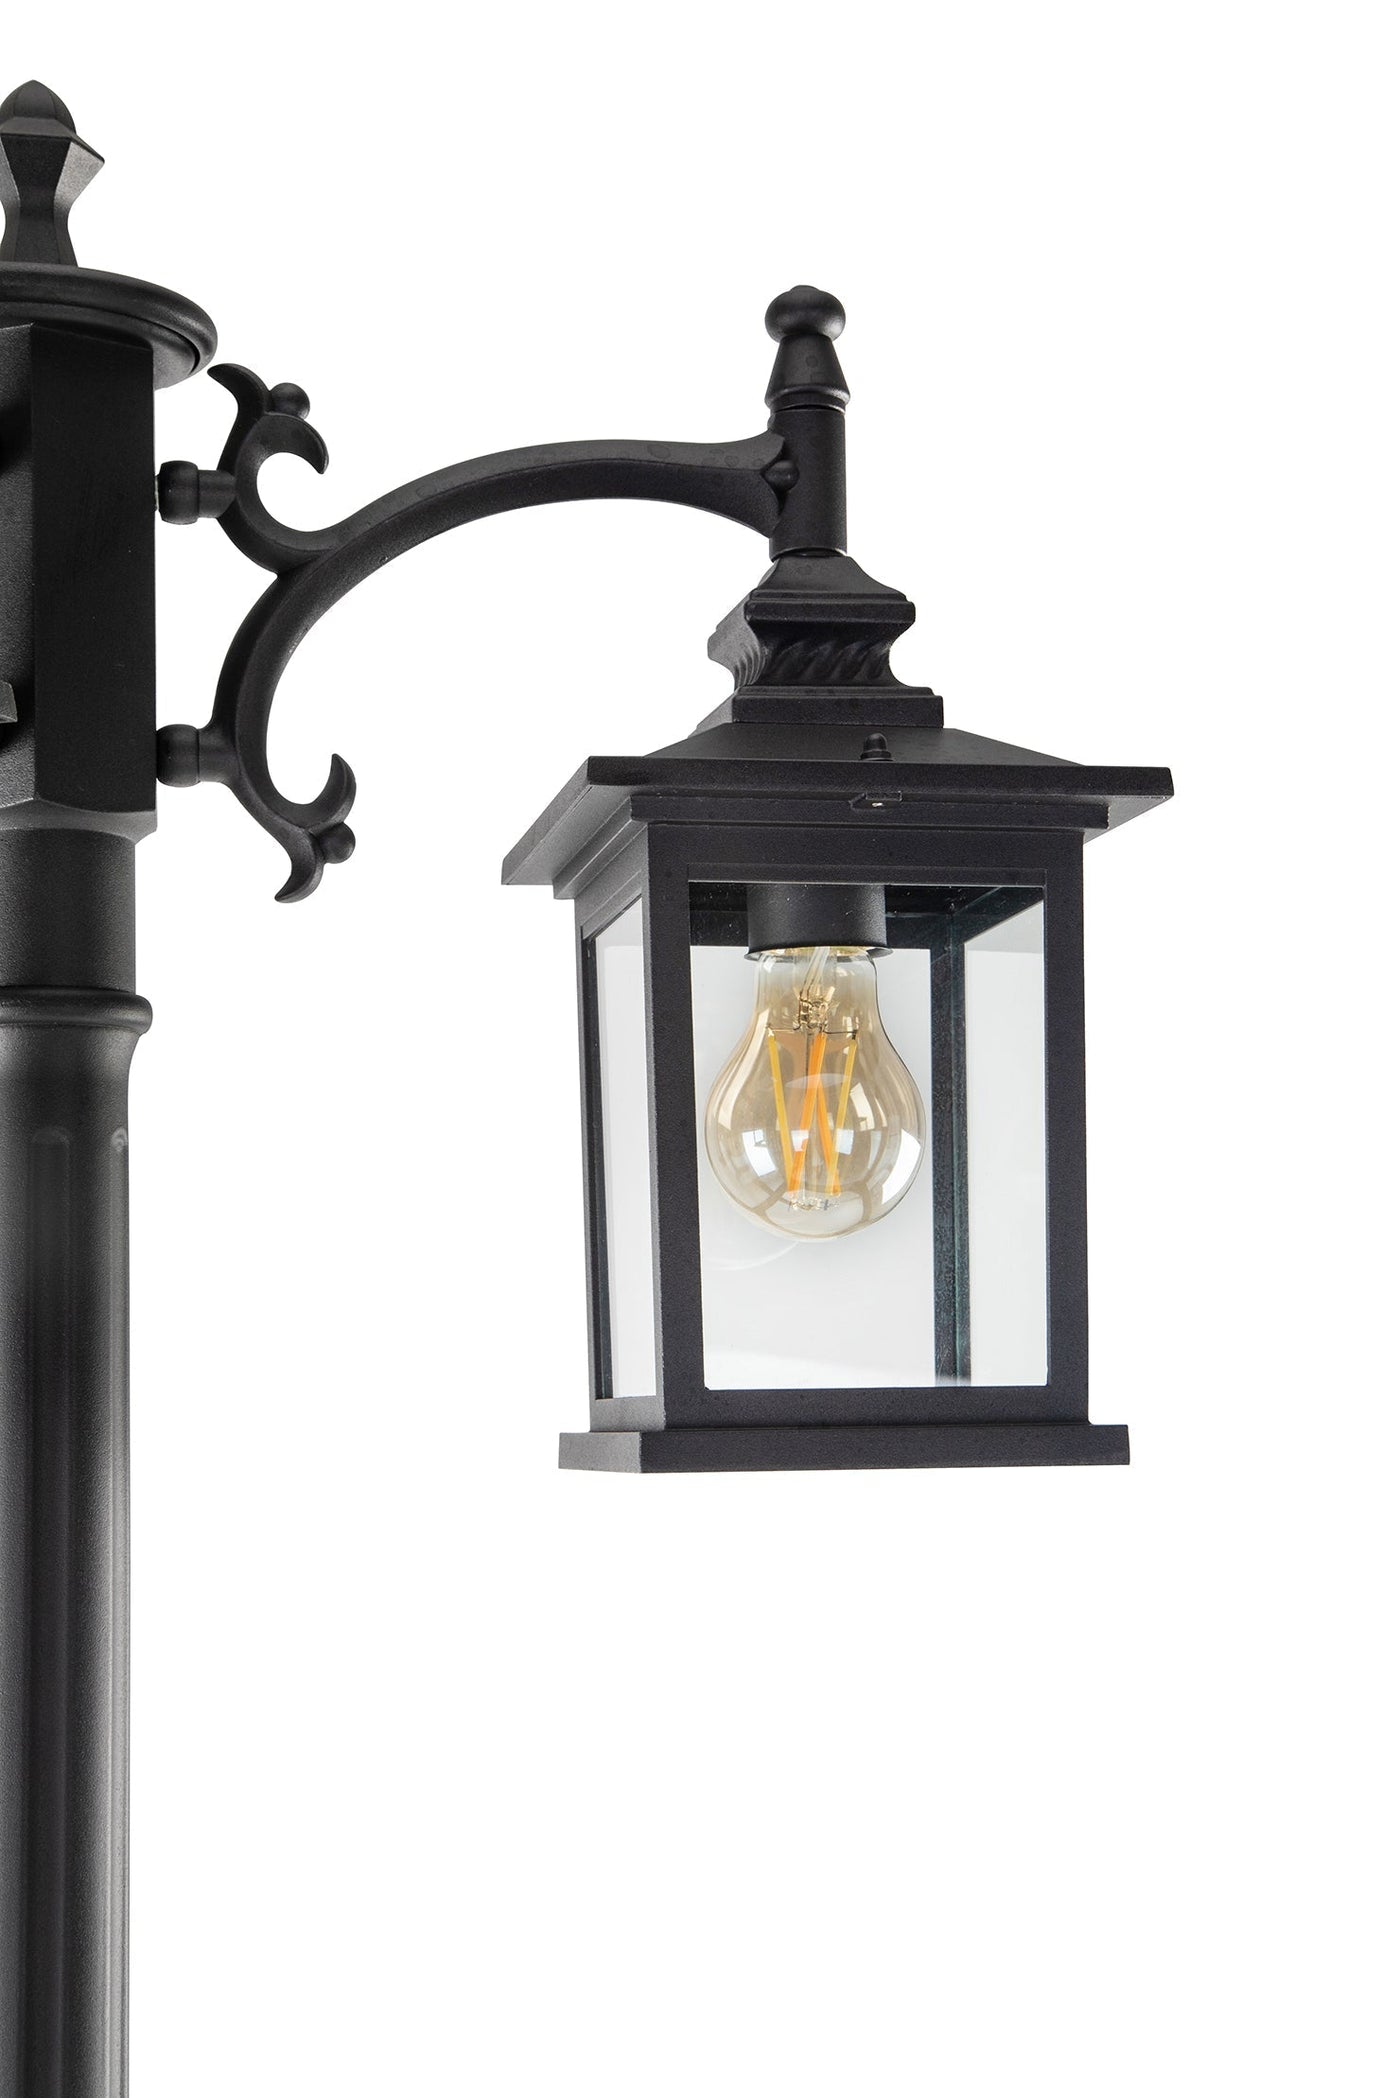 LUTEC-HIGH POST 3 Square-Head Die-Cast Aluminum LED Outdoor Hard Wired Street Light (Head & Pole), ‎Black